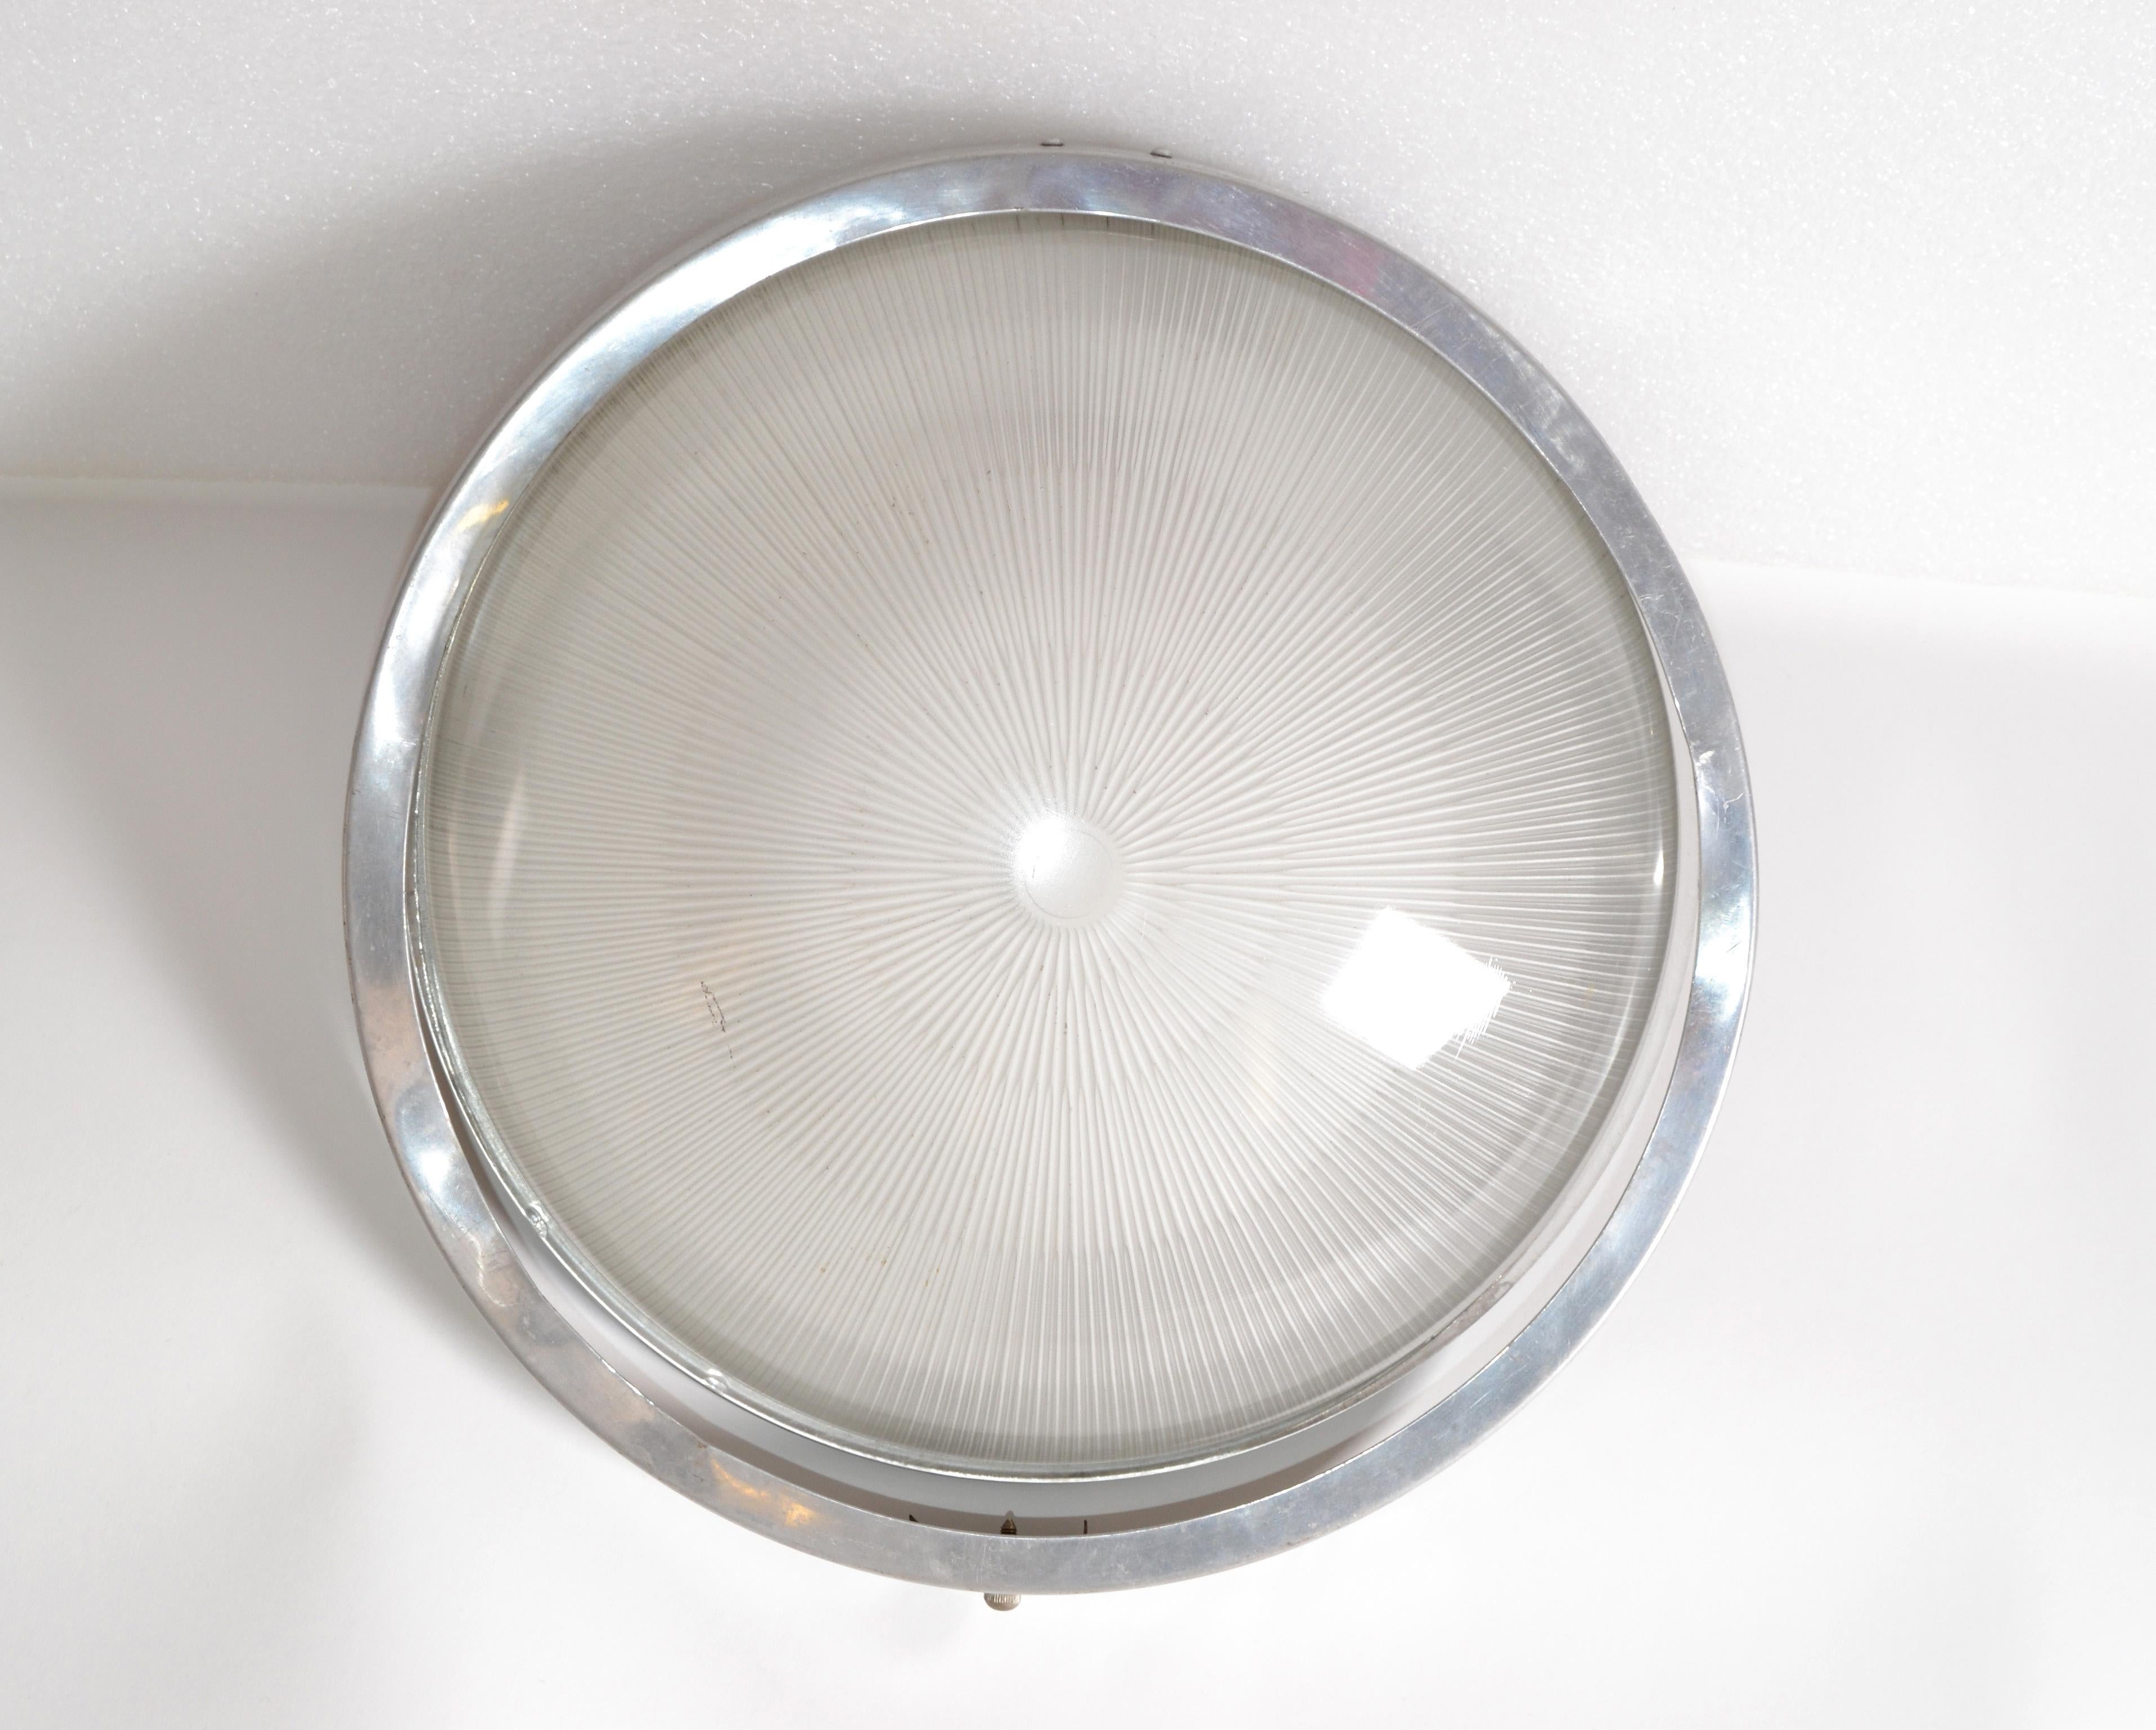 Mid-20th Century Large Marine Flush Mount, Ceiling Light in Aluminum & Glass by Holophane France For Sale